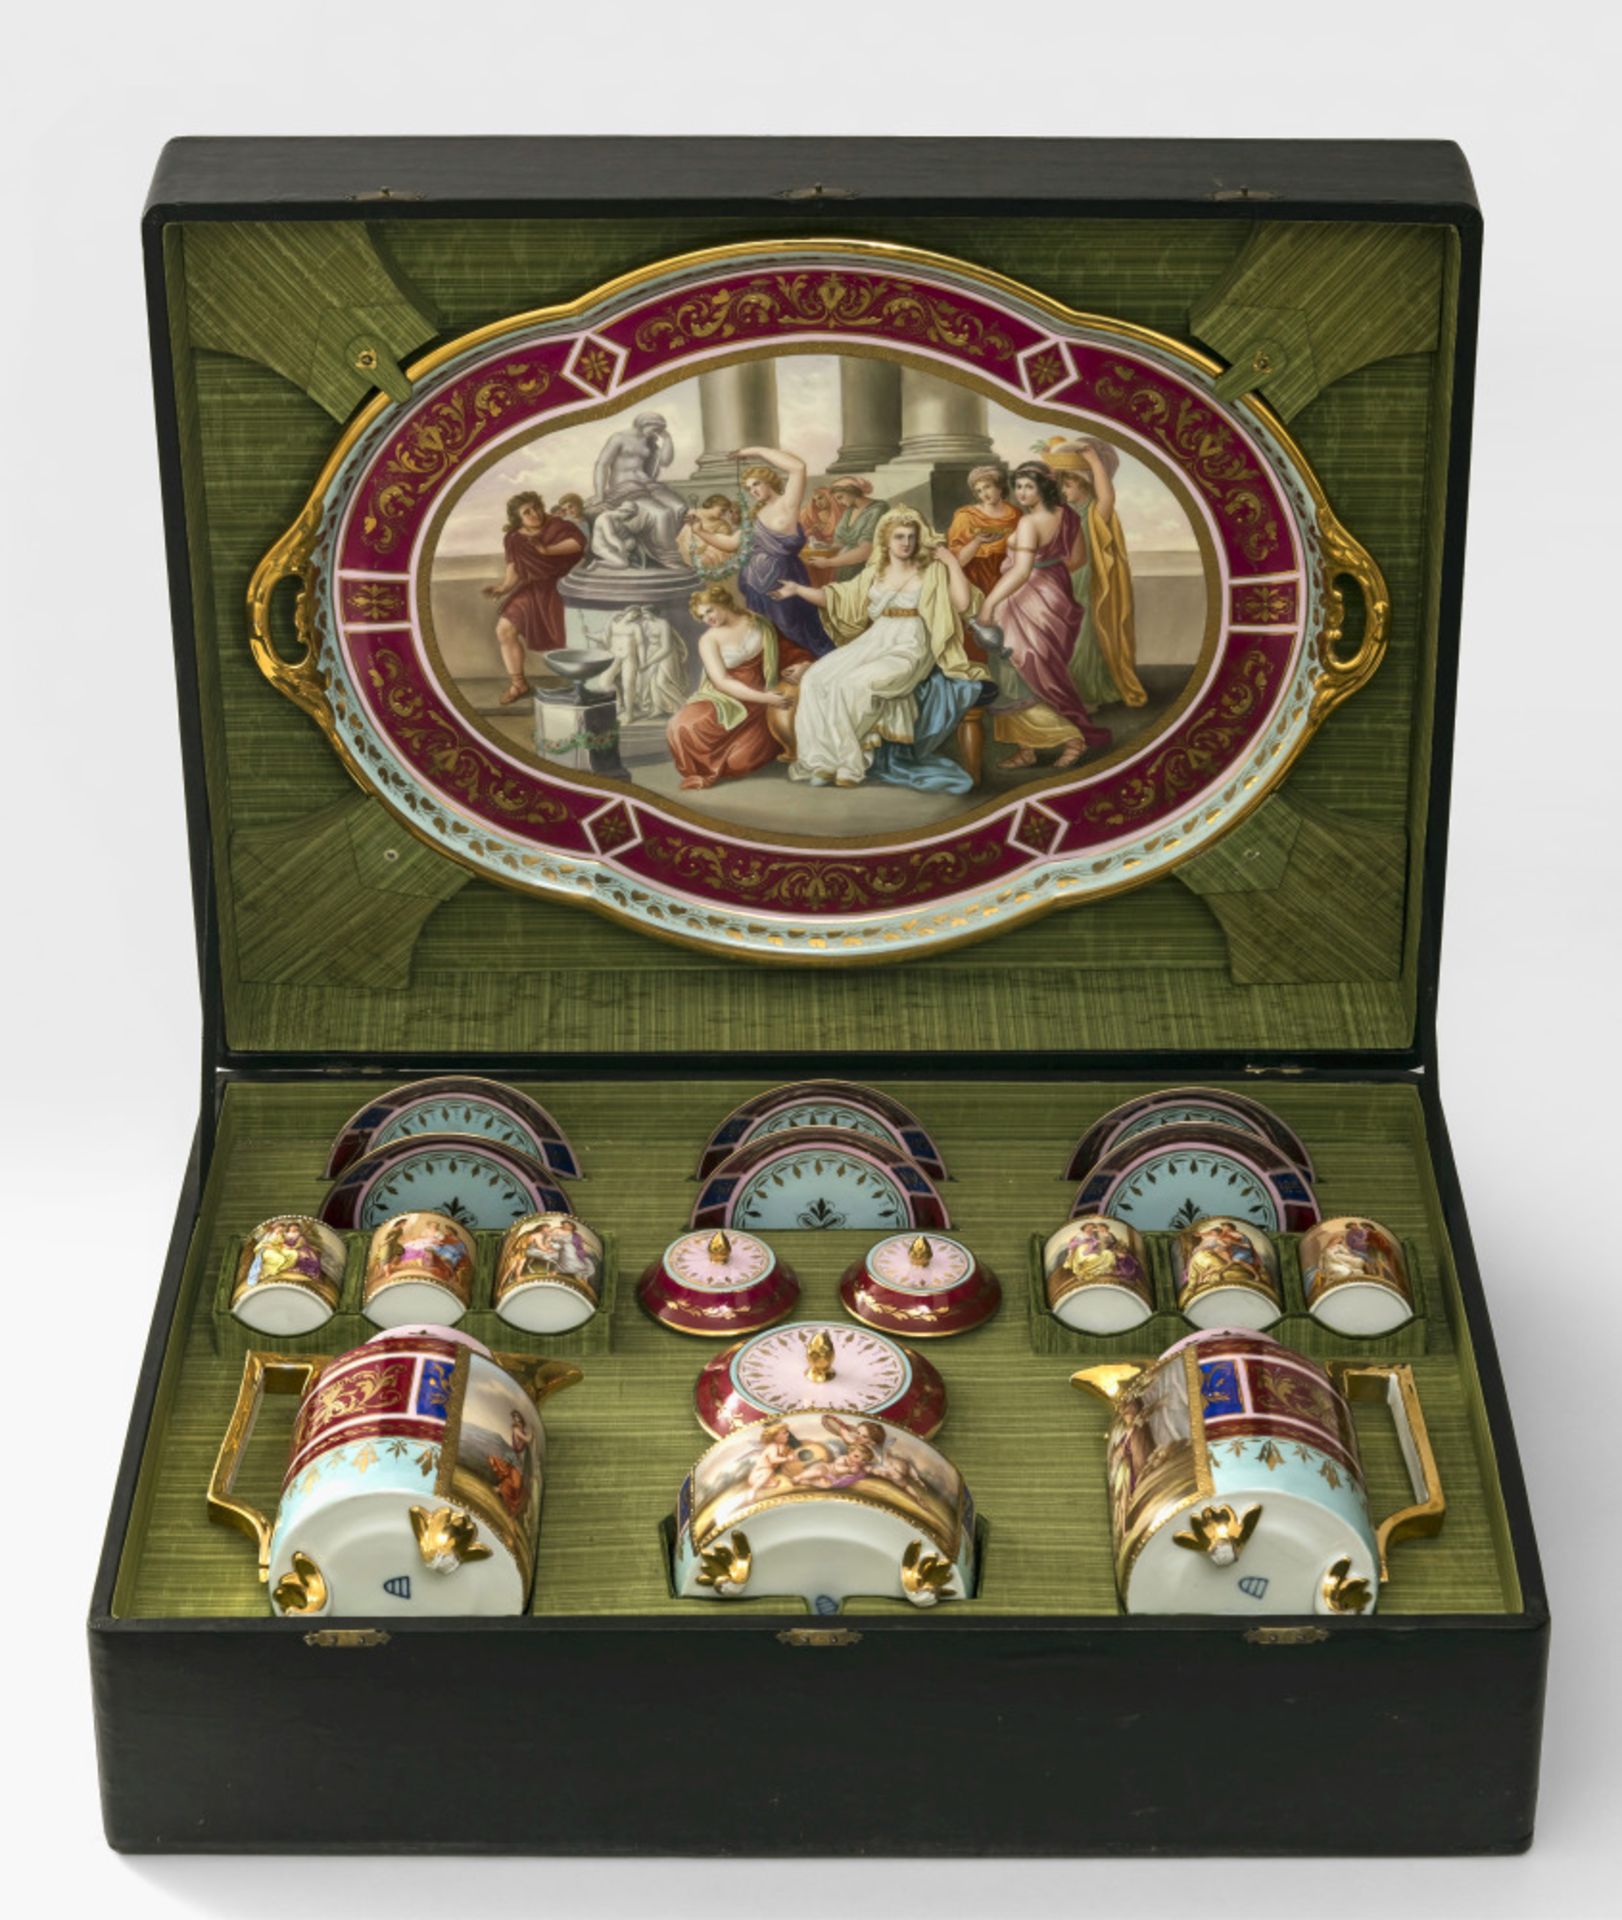 A 16-piece coffee service - Count Thun porcelain manufacture Klösterle near Karlsbad, late 19th cent